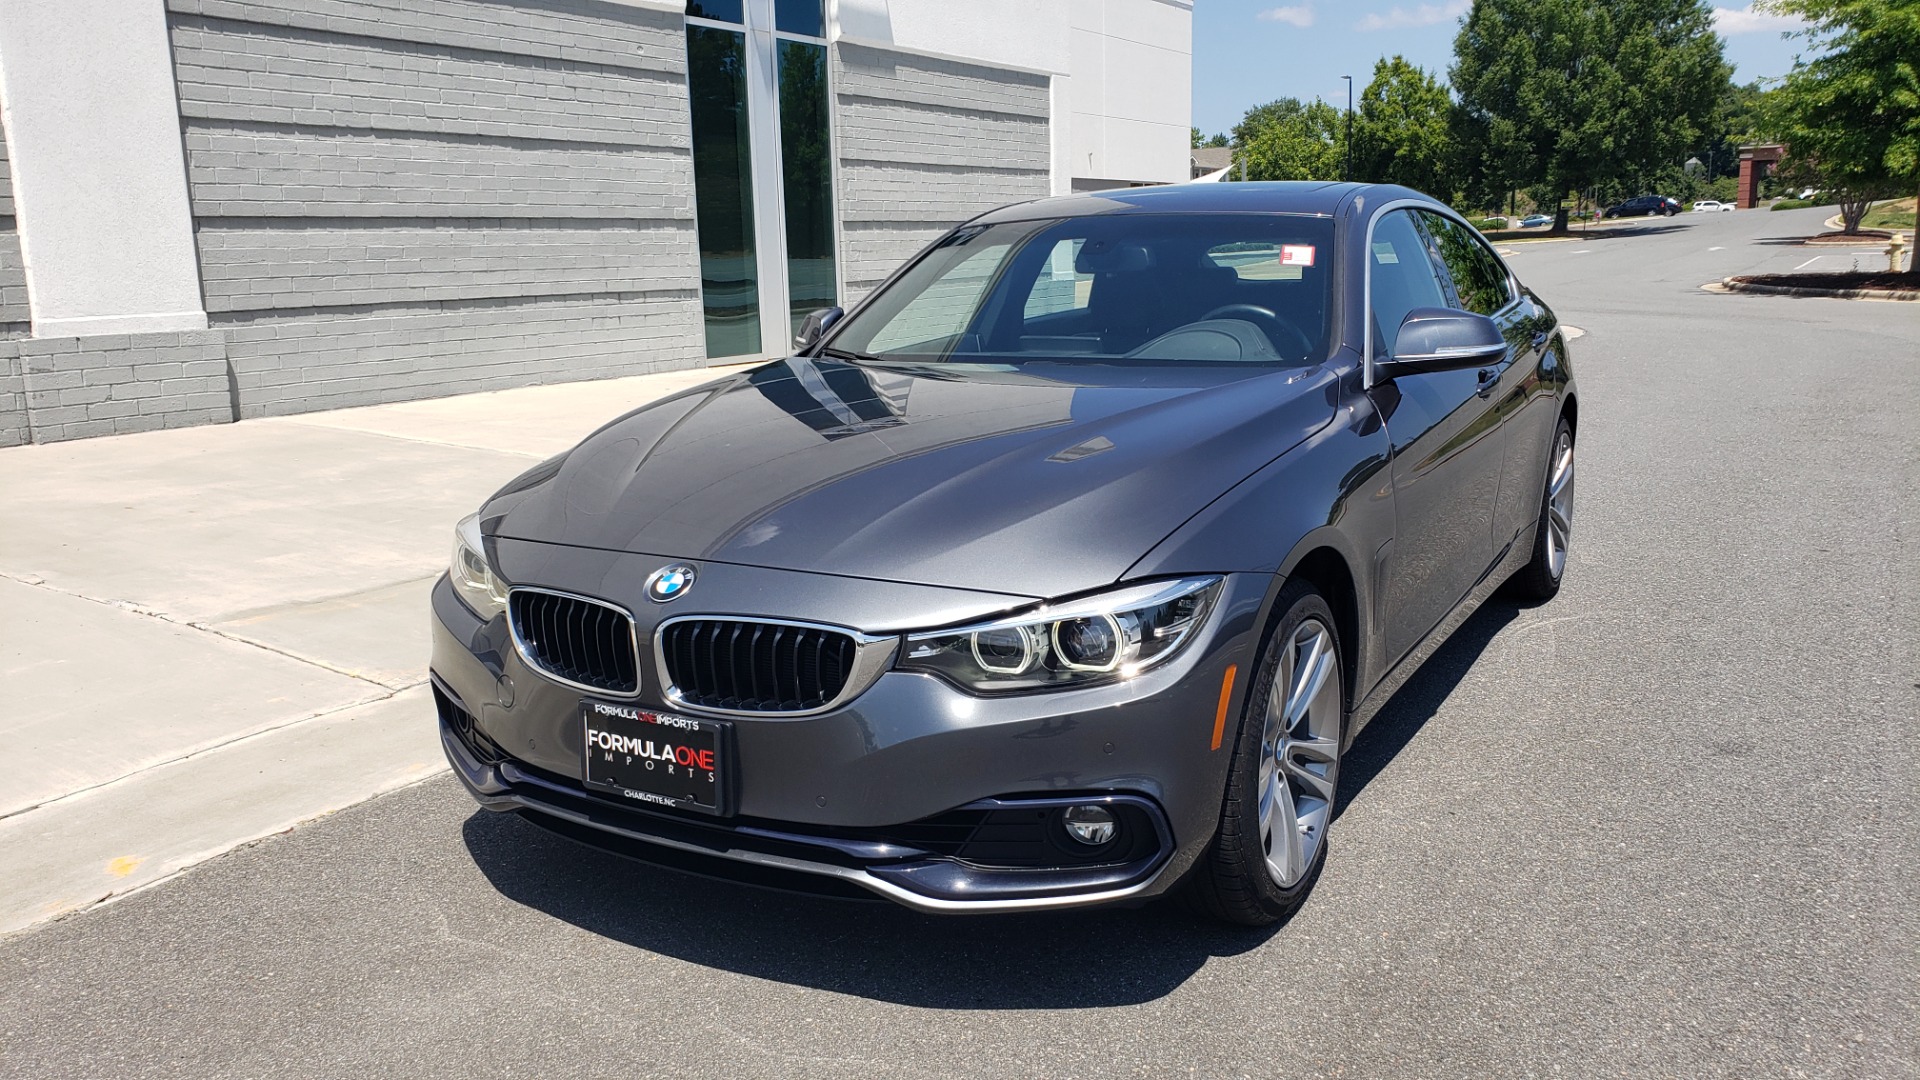 Used 2018 BMW 4 SERIES 430I XDRIVE PREMIUM / NAV / SUNROOF / HTD STS / PDC / REARVIEW for sale Sold at Formula Imports in Charlotte NC 28227 3